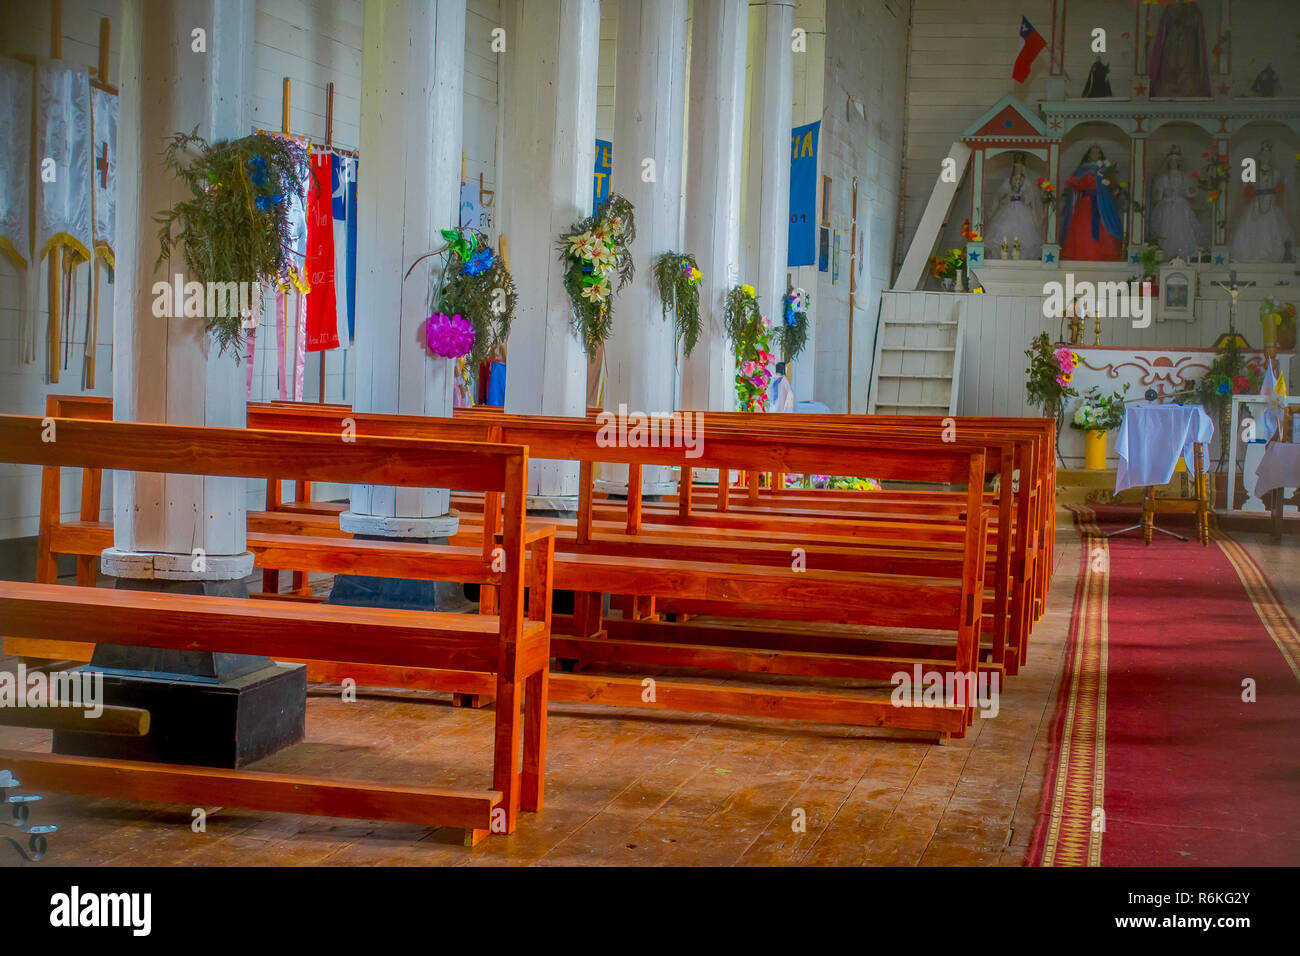 CHILOE, CHILE - SEPTEMBER, 27, 2018: Inside view of Jes s of Nazareno church in Aldachildo on Lemuy Island, is one of the Churches of Chilo Archipelag Stock Photo